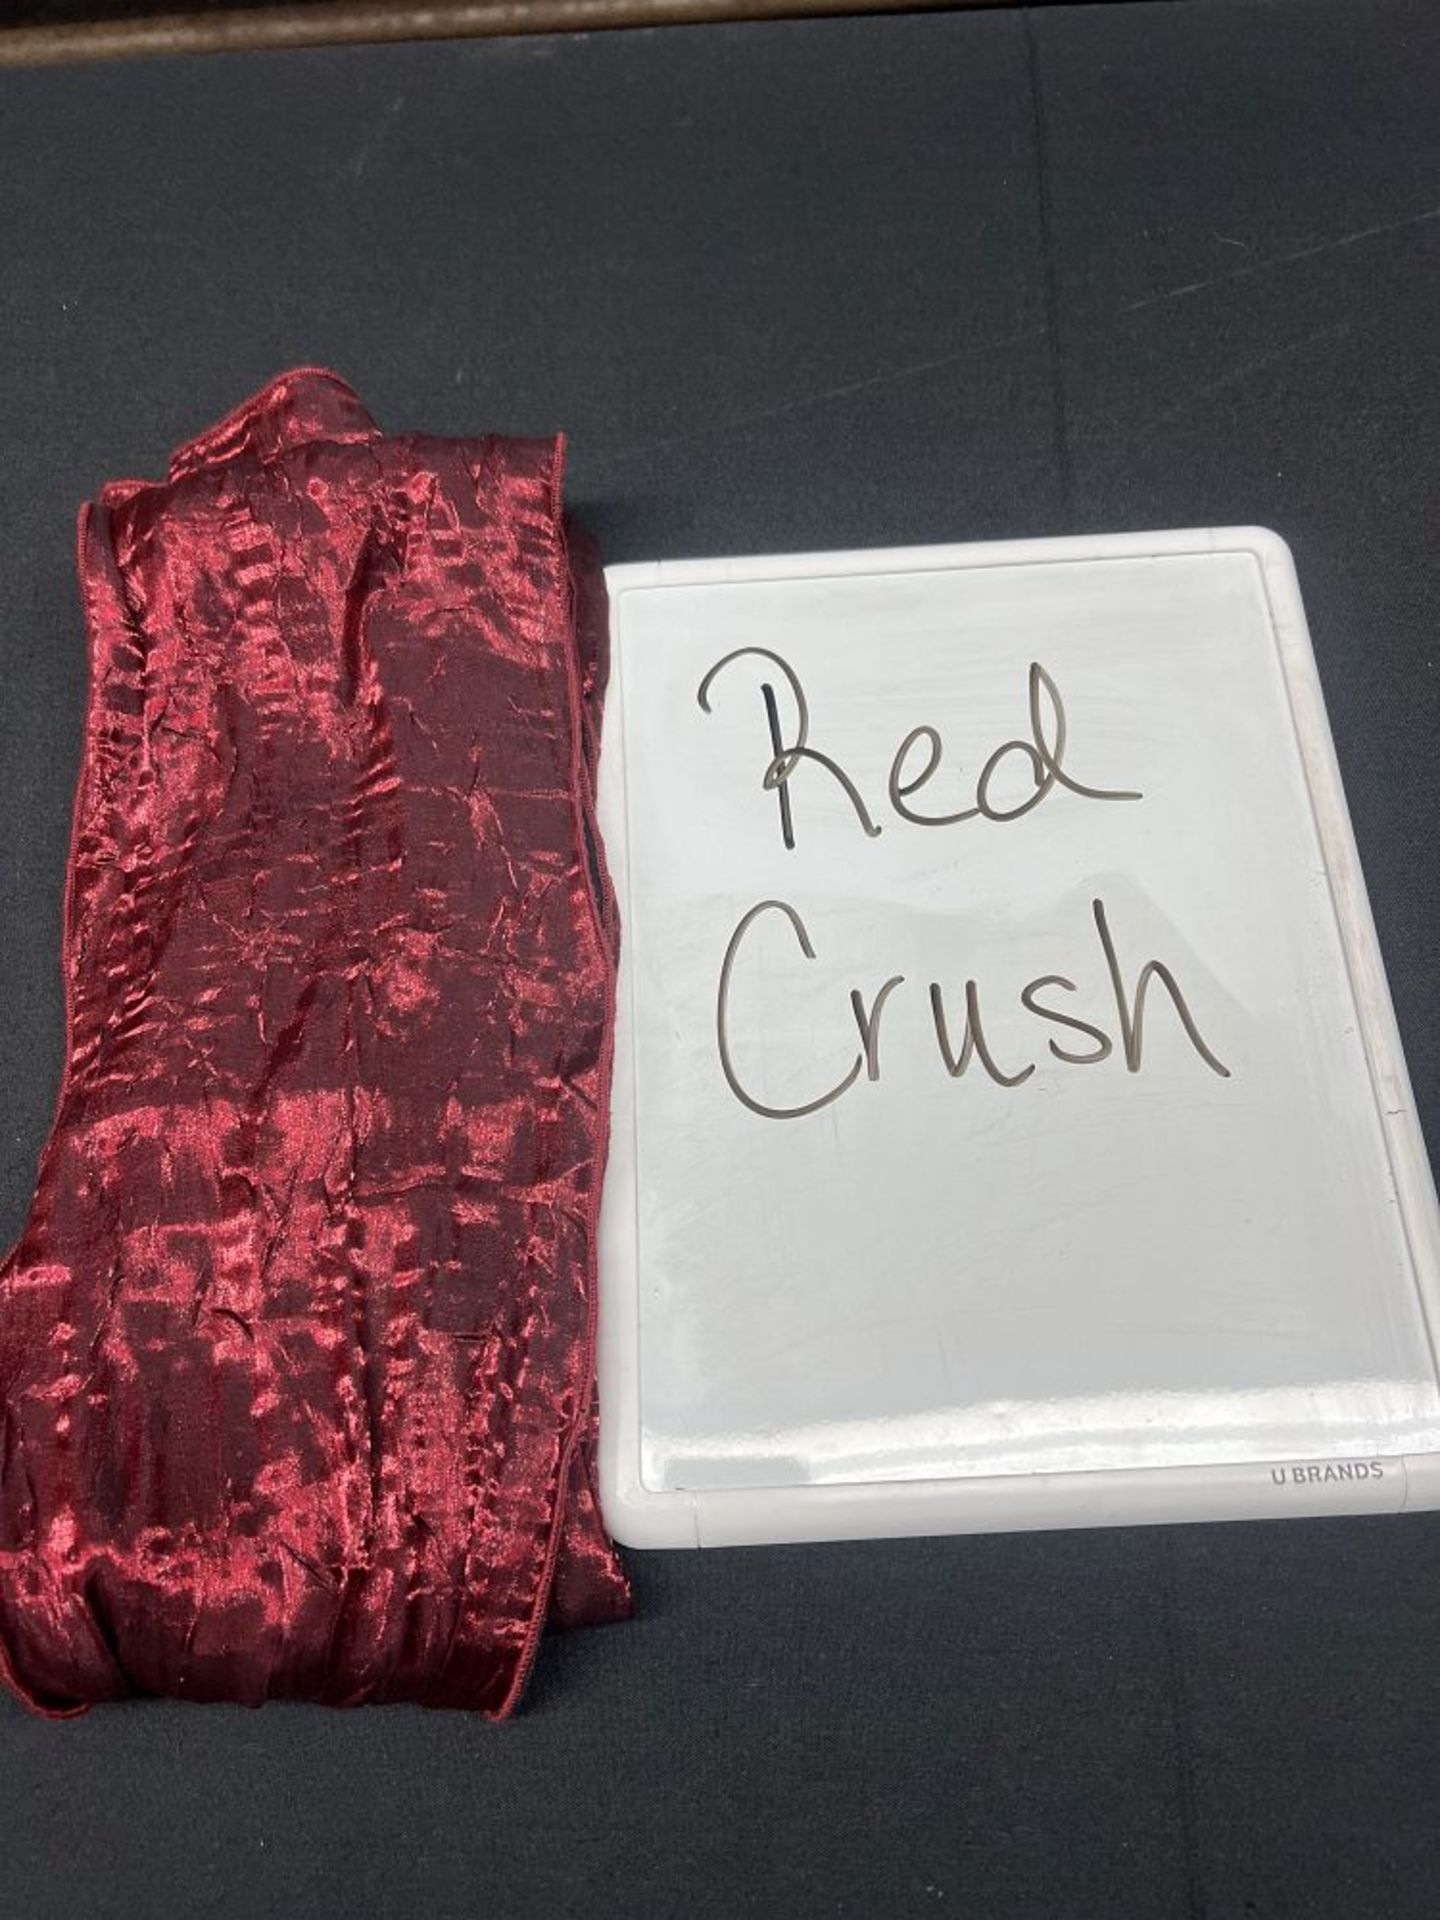 72" x 72" Red Crush Tablecloth